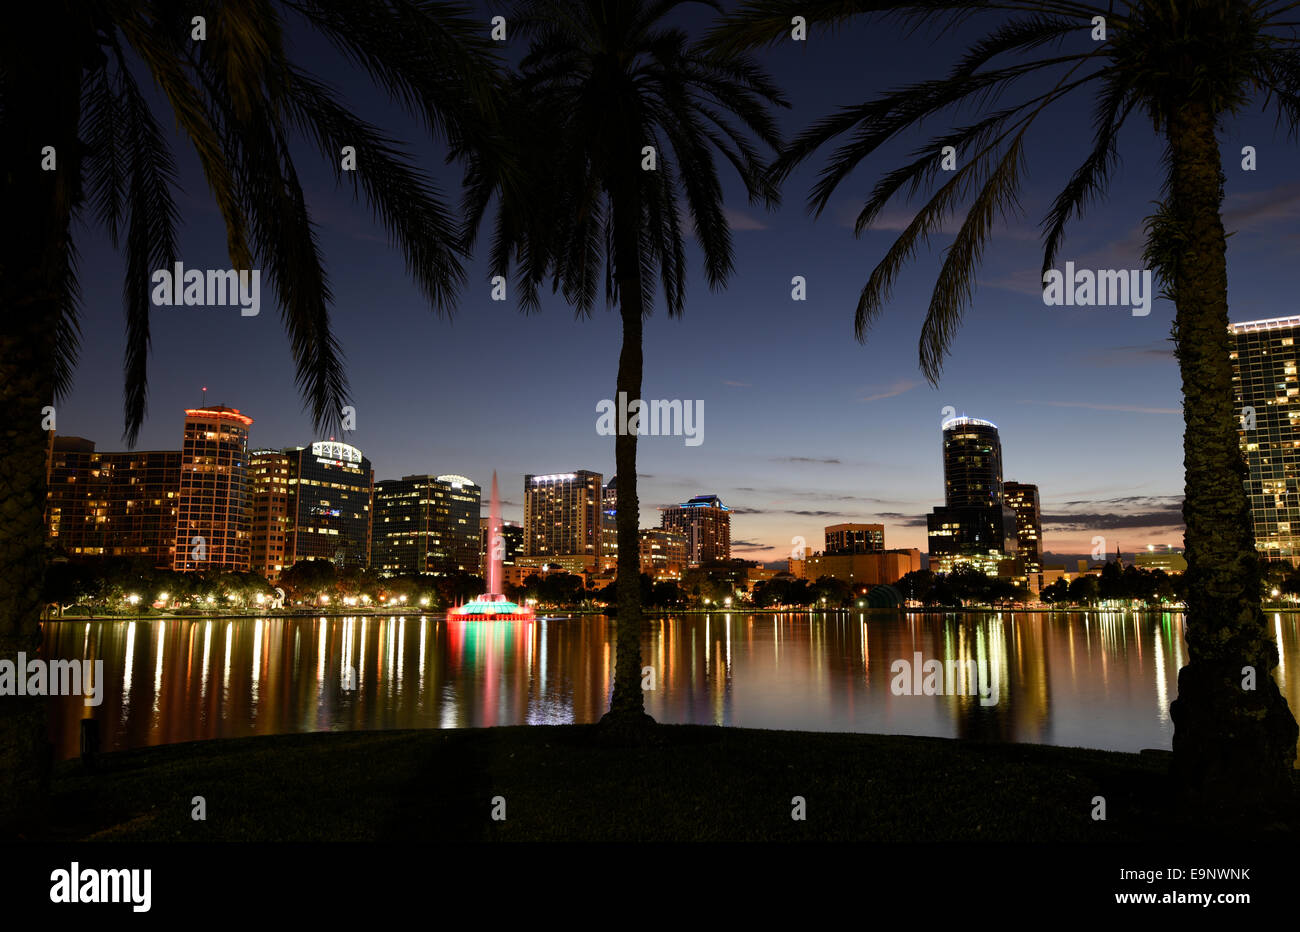 View from Lake Eola of downtown Orlando, Florida at sunset. Stock Photo